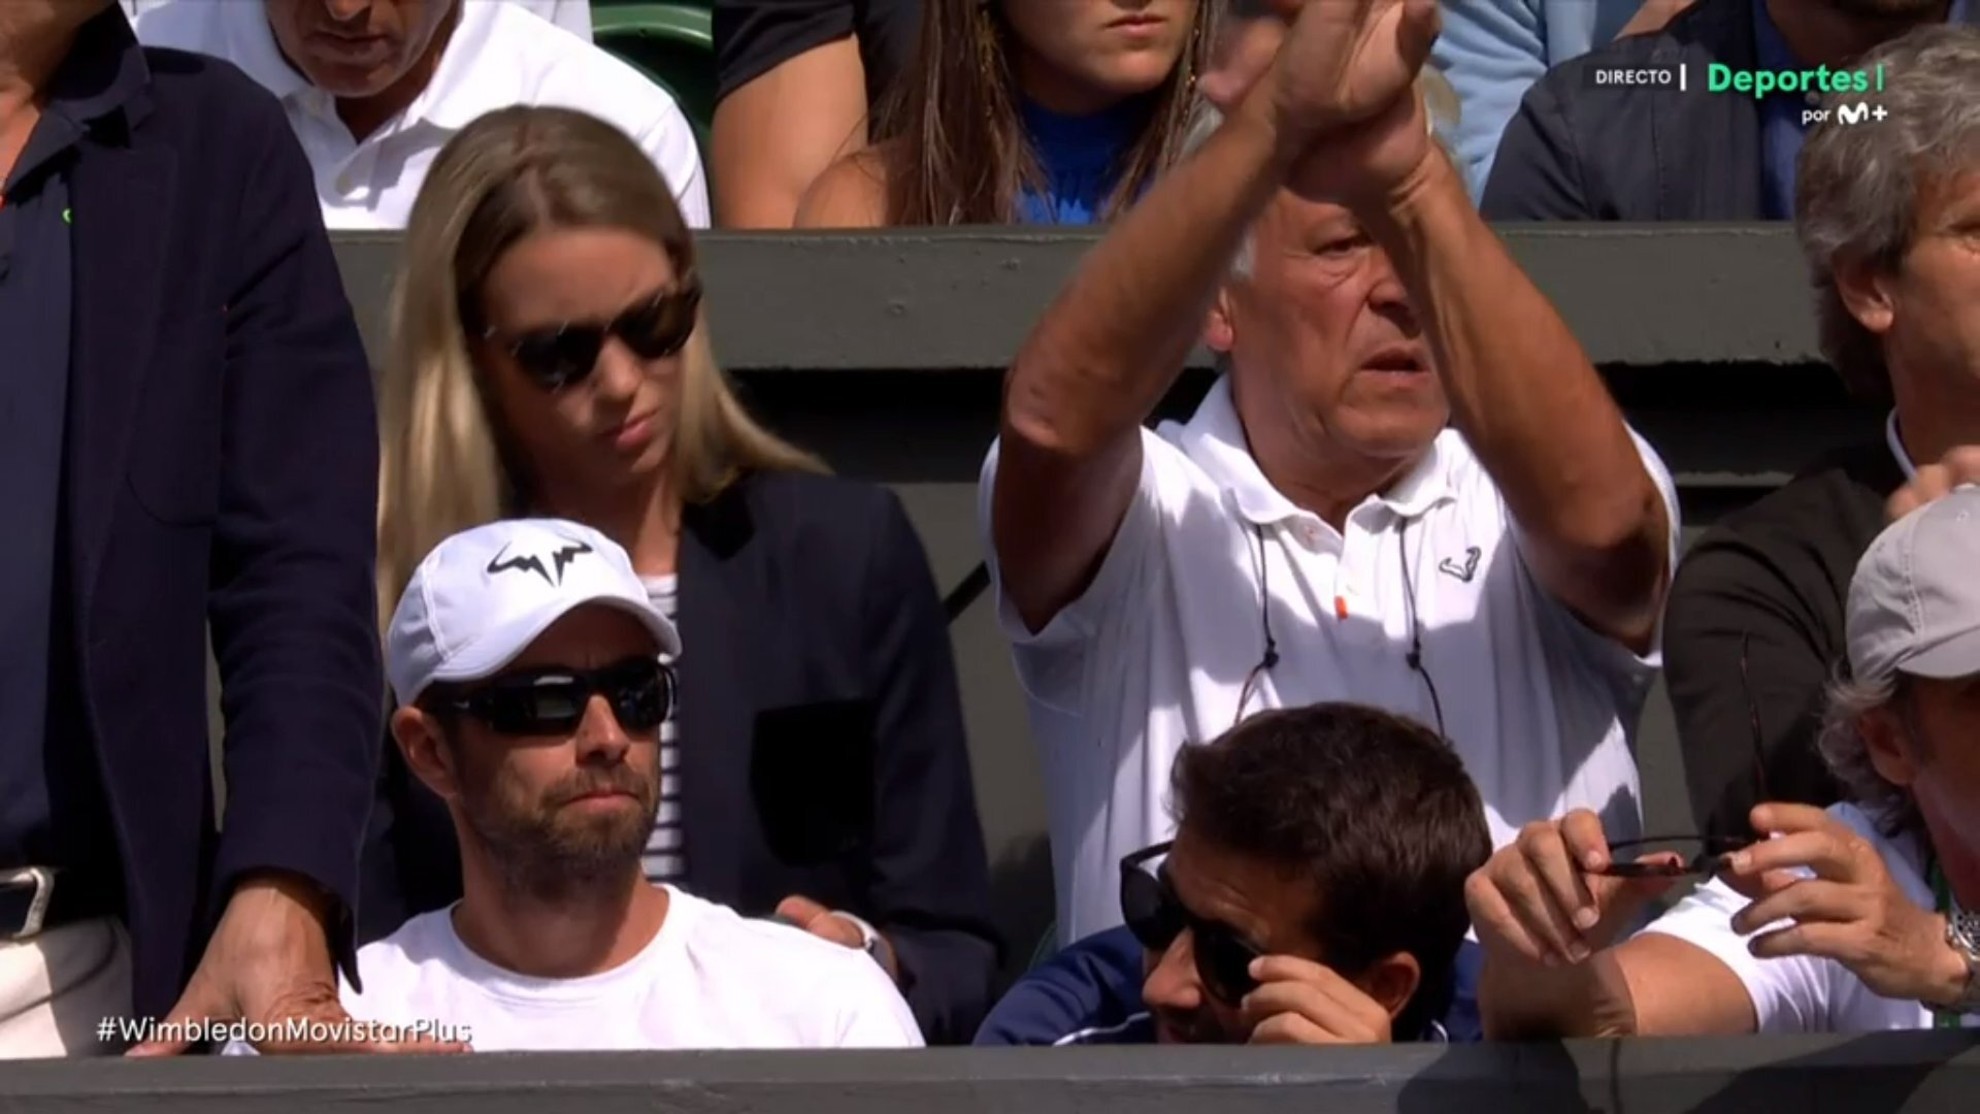 The moment when Nadal's father suggested he withdraw from the quarter-final